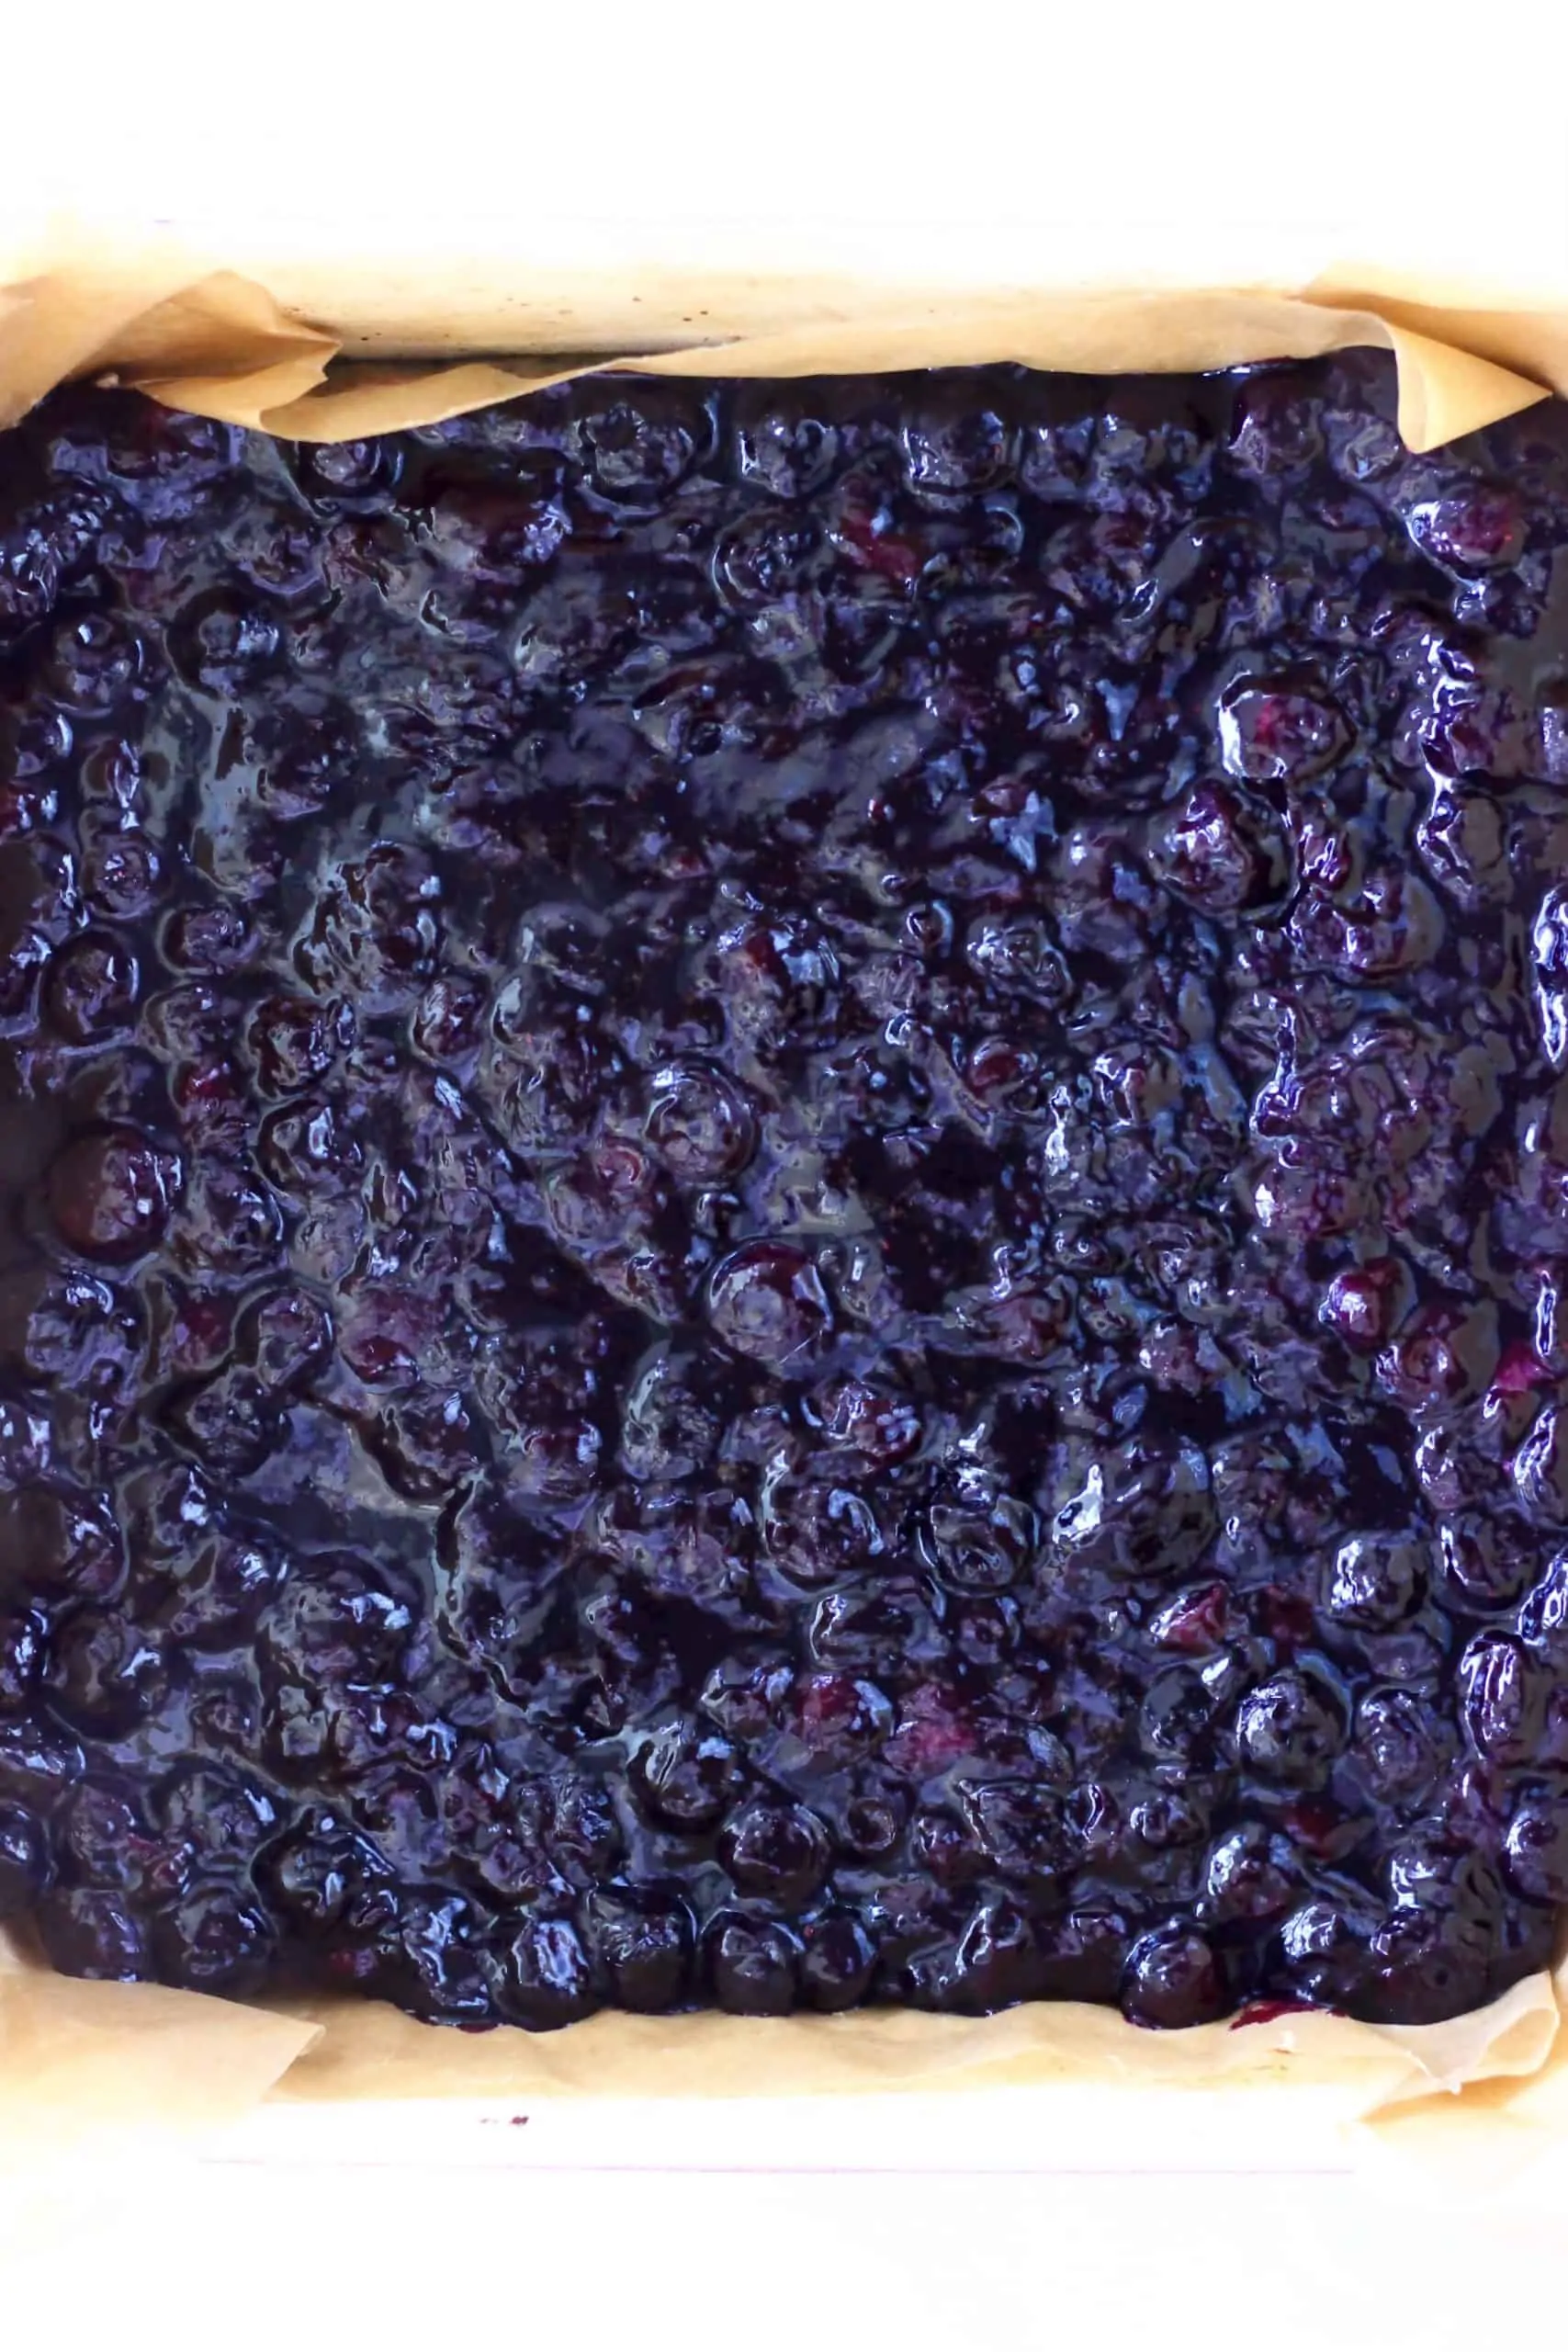 Cooked blueberry mixture on top of baked crumble base in a square baking tin